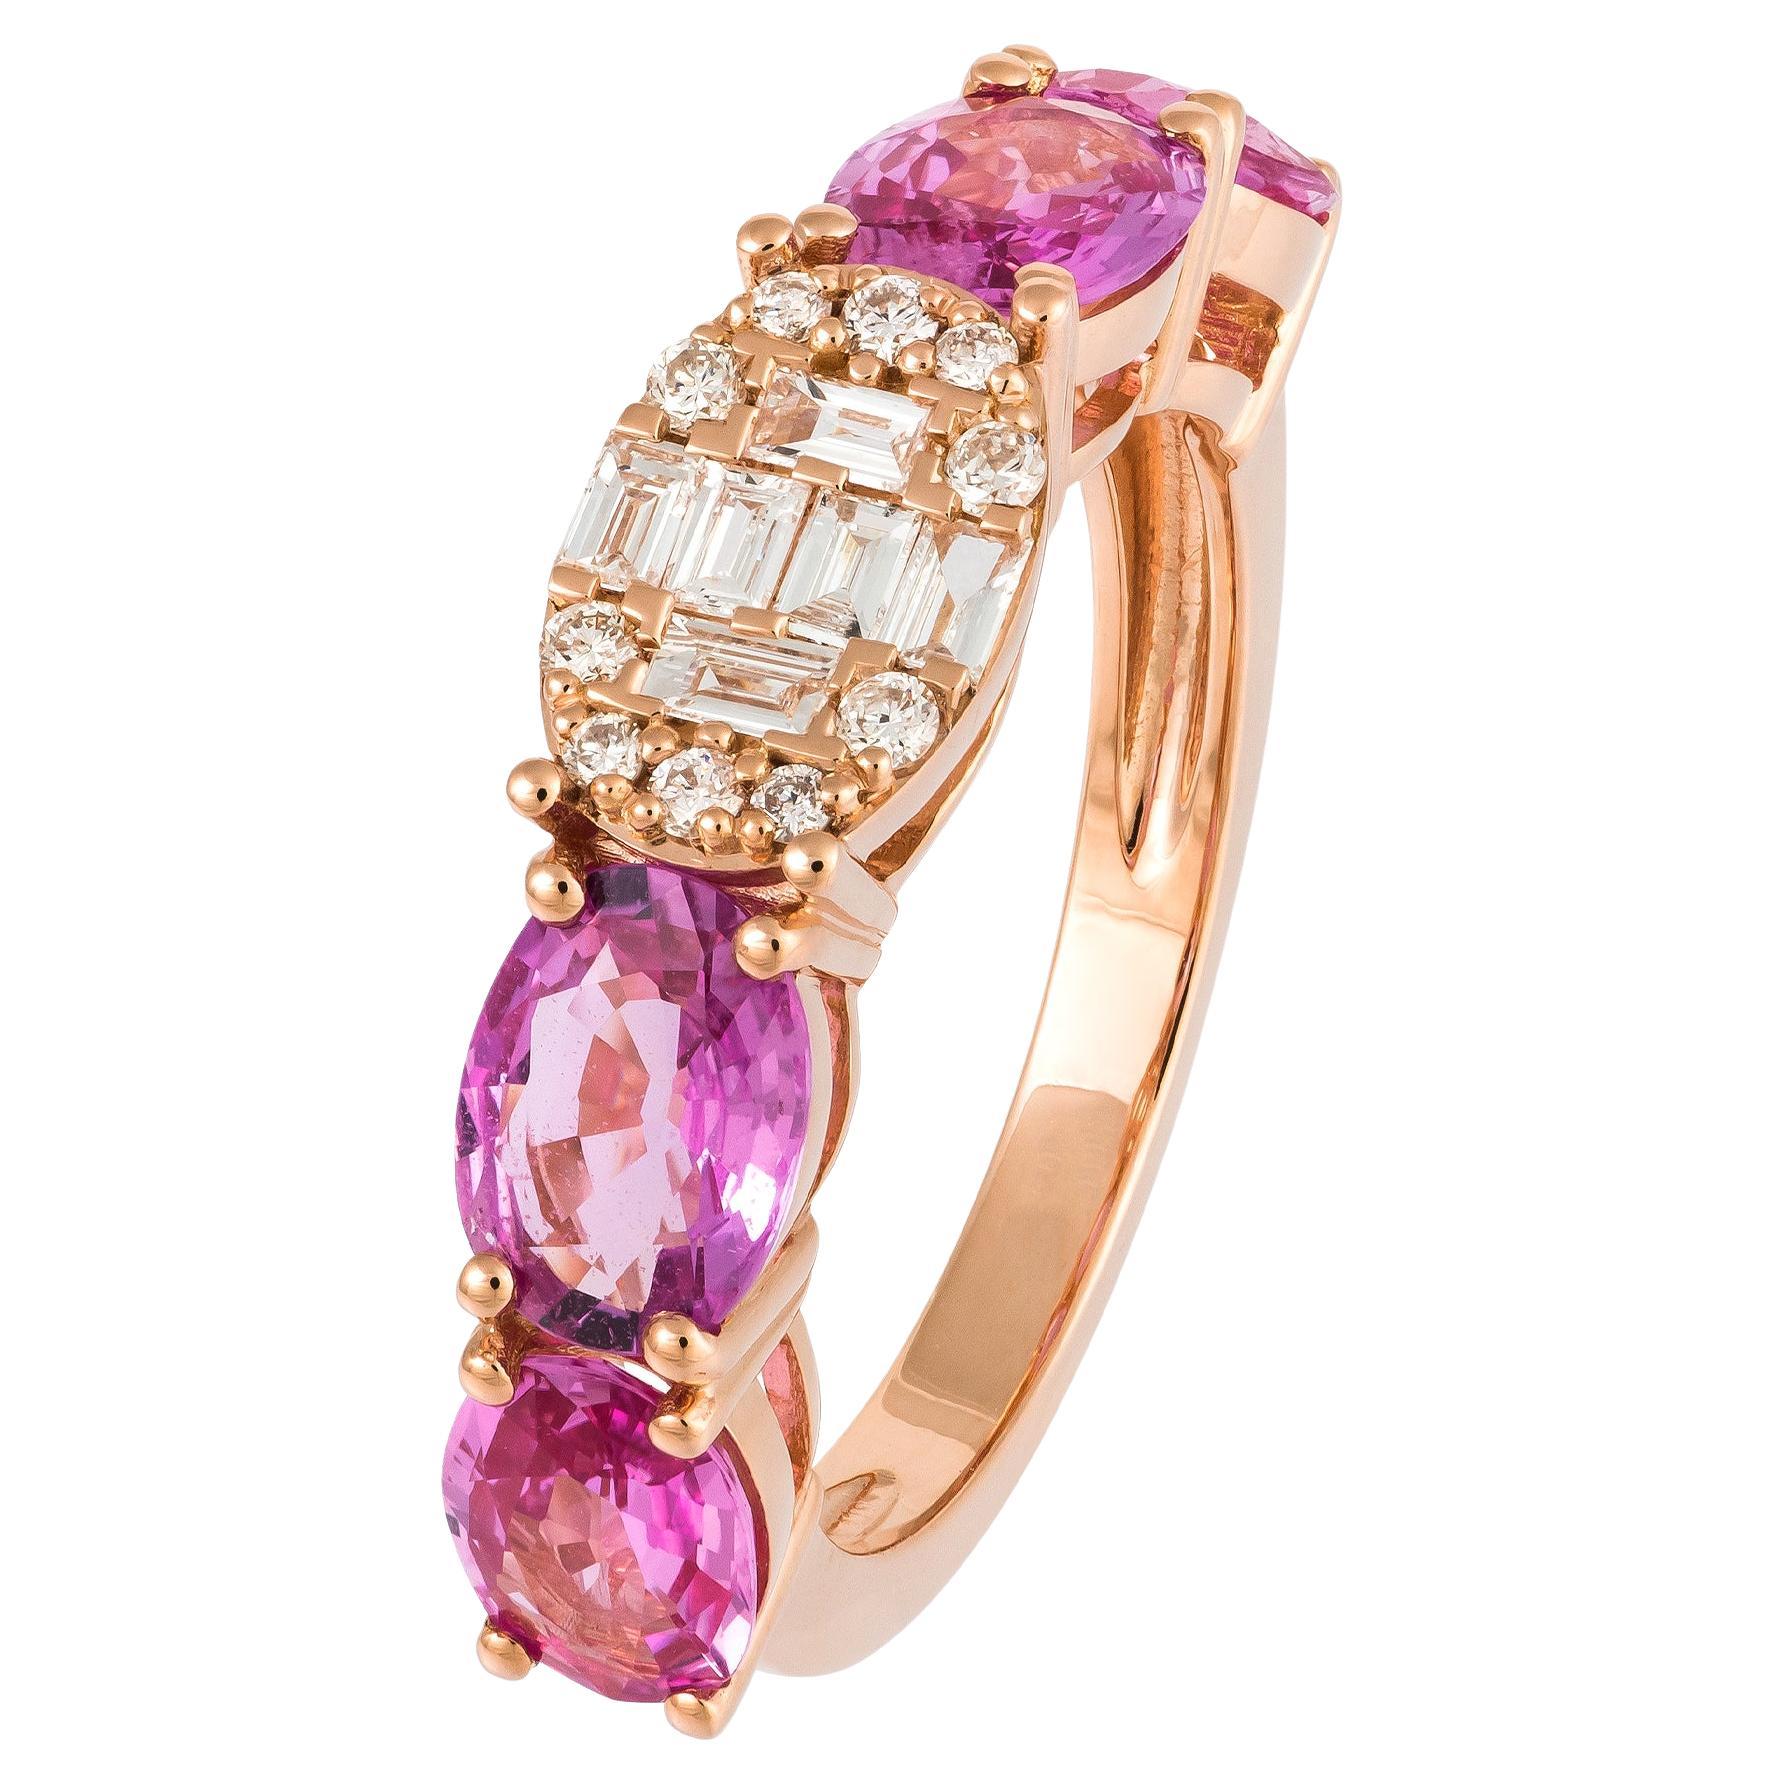 For Sale:  Breathtaking Pink 18K Gold Pink Sapphire Diamond Ring For Her